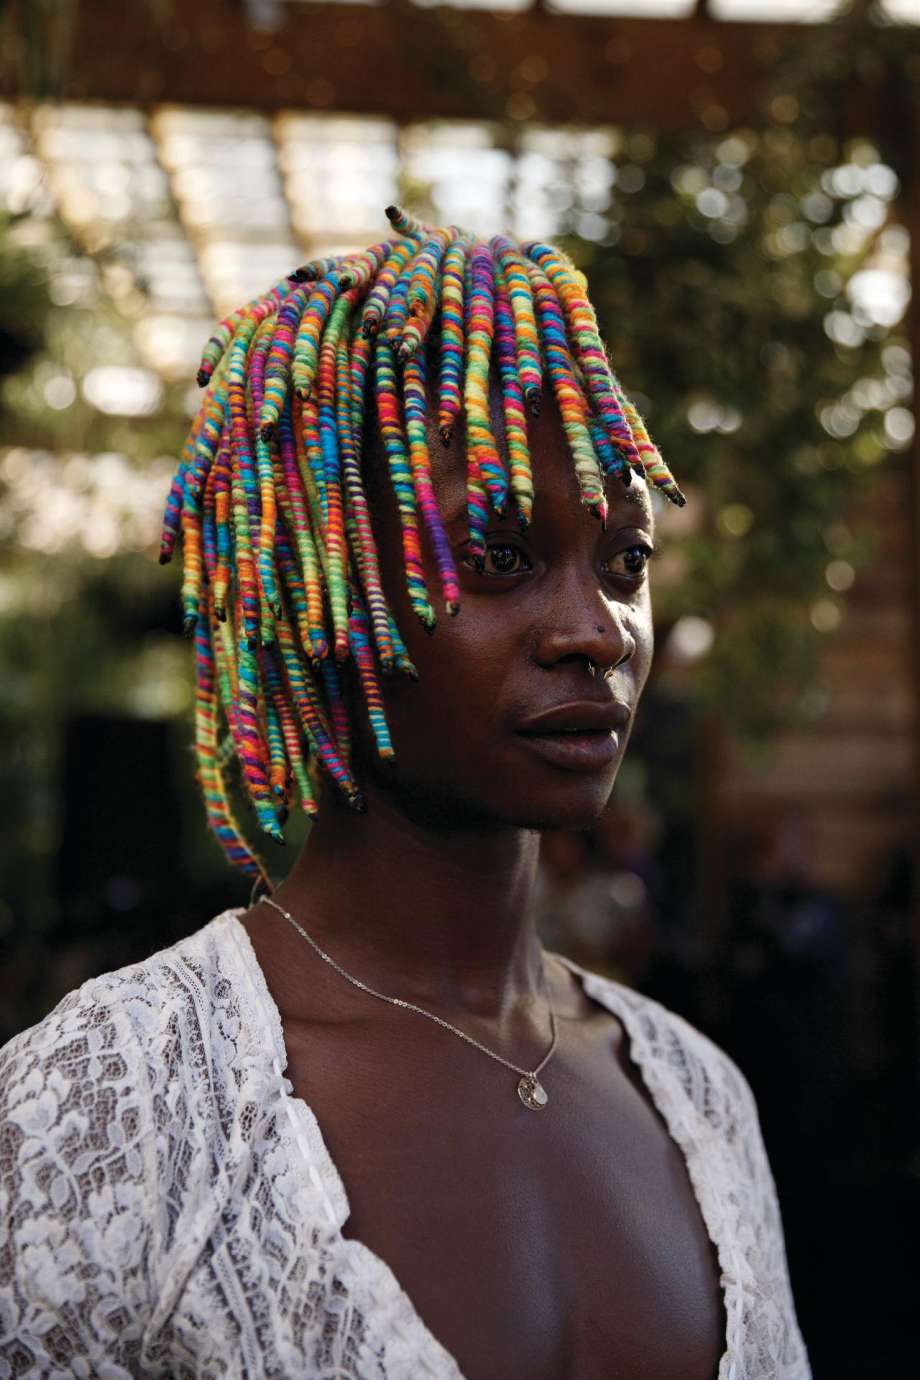 A photograph of a woman with colorful thread wrapped in her hair by artist Samantha Everette